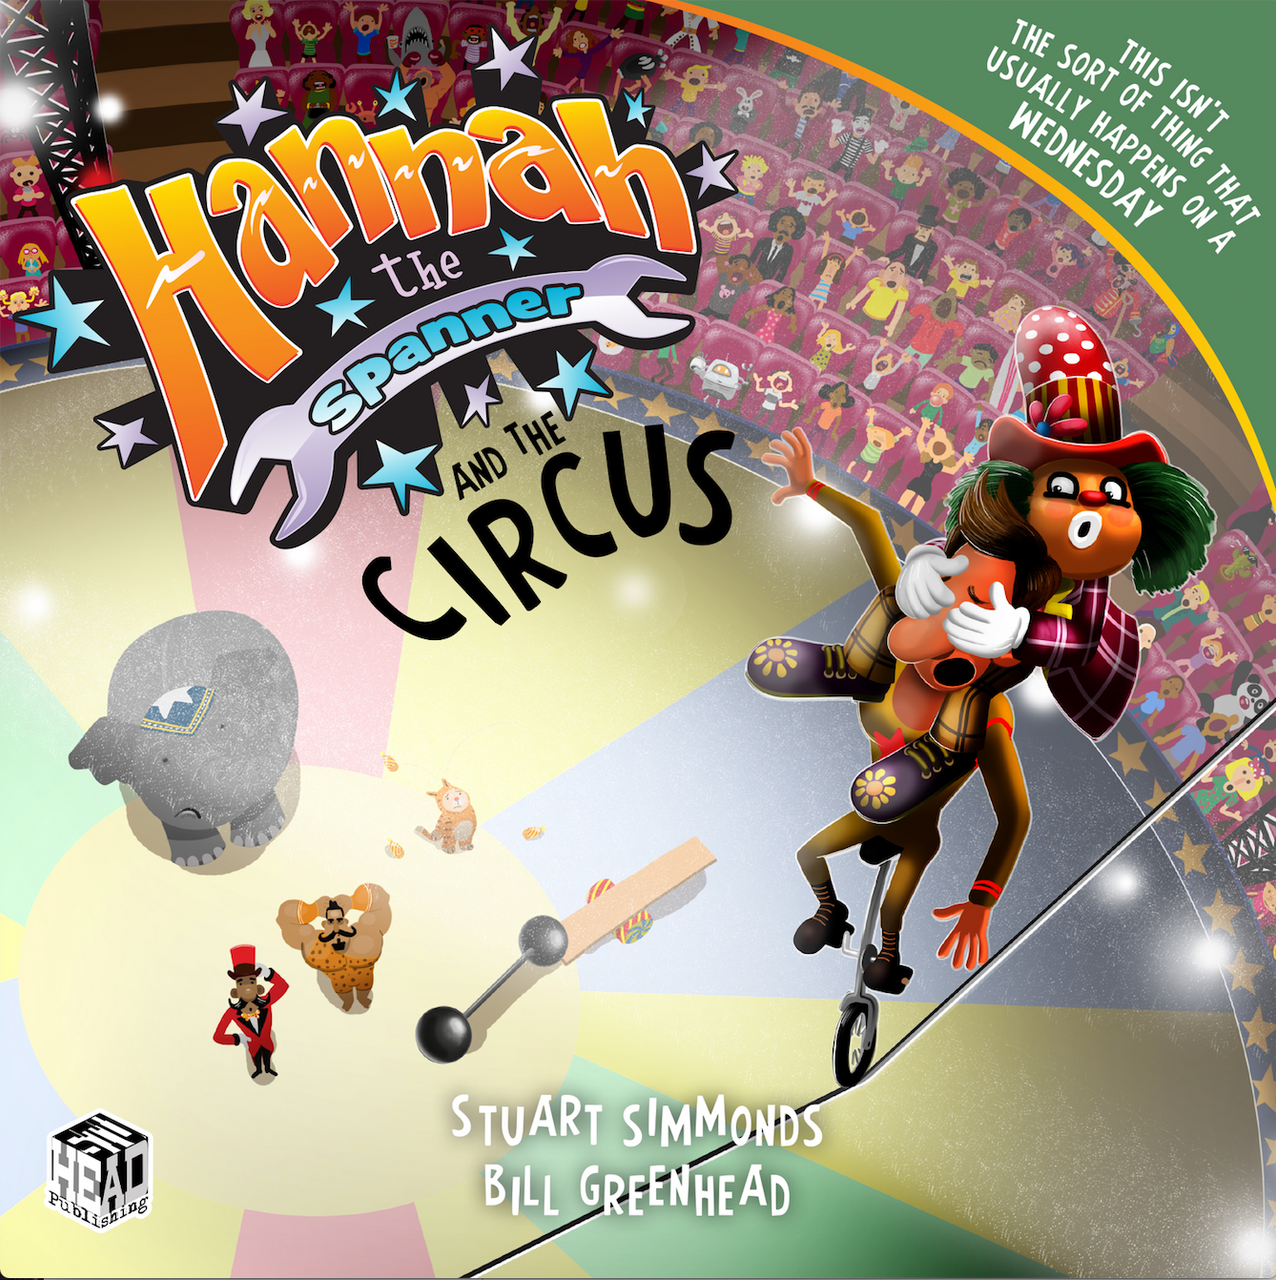 Stuart Simmonds / Hannah the Spanner and the Circus (Children's Picture Book)